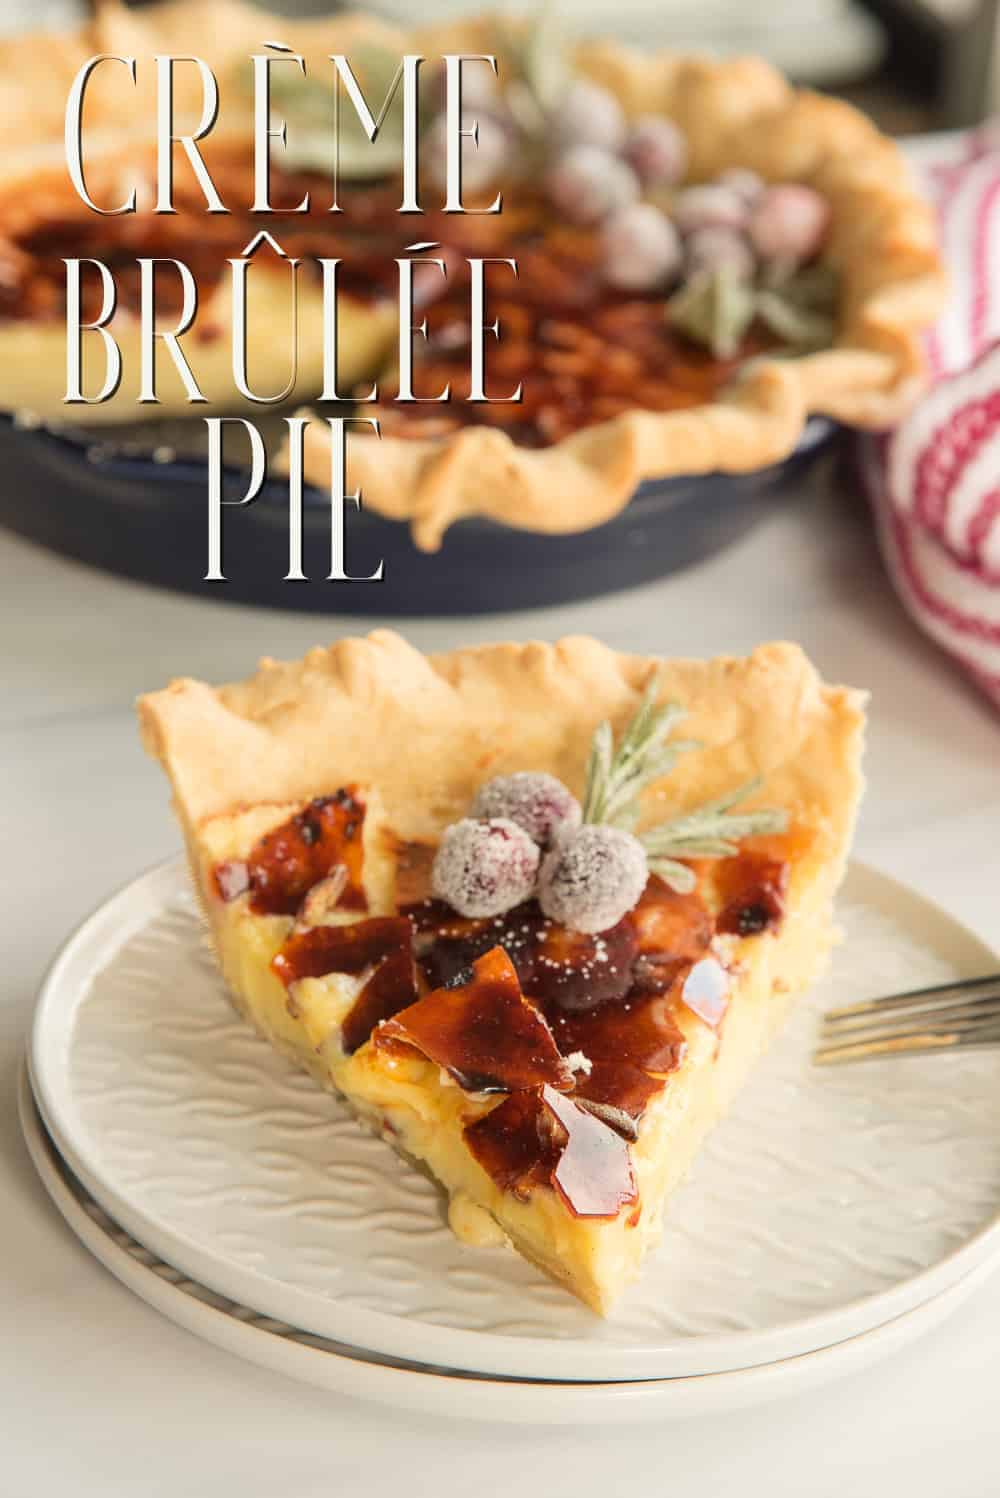 Créme Brûlèe Pie is a marriage of flaky pie crust and the classic French custard. This easy-to-make dessert will have you swooning at its decadence. Pure vanilla flavor wrapped in a buttery, flaky crust and topped with a candy sugar shell. Serve with or without sugared garnishes. #CrémeBrûlèe #CrémeBrûlèeDessert #dessert #pie #BakingPie #holidayrecipe #easydessertrecipe #mealypiedough #patebrisee #piedough #custard #eggcustard #flan #dessertrecipe #holidaydessertrecipe #baking #pastries #pastry via @ediblesense